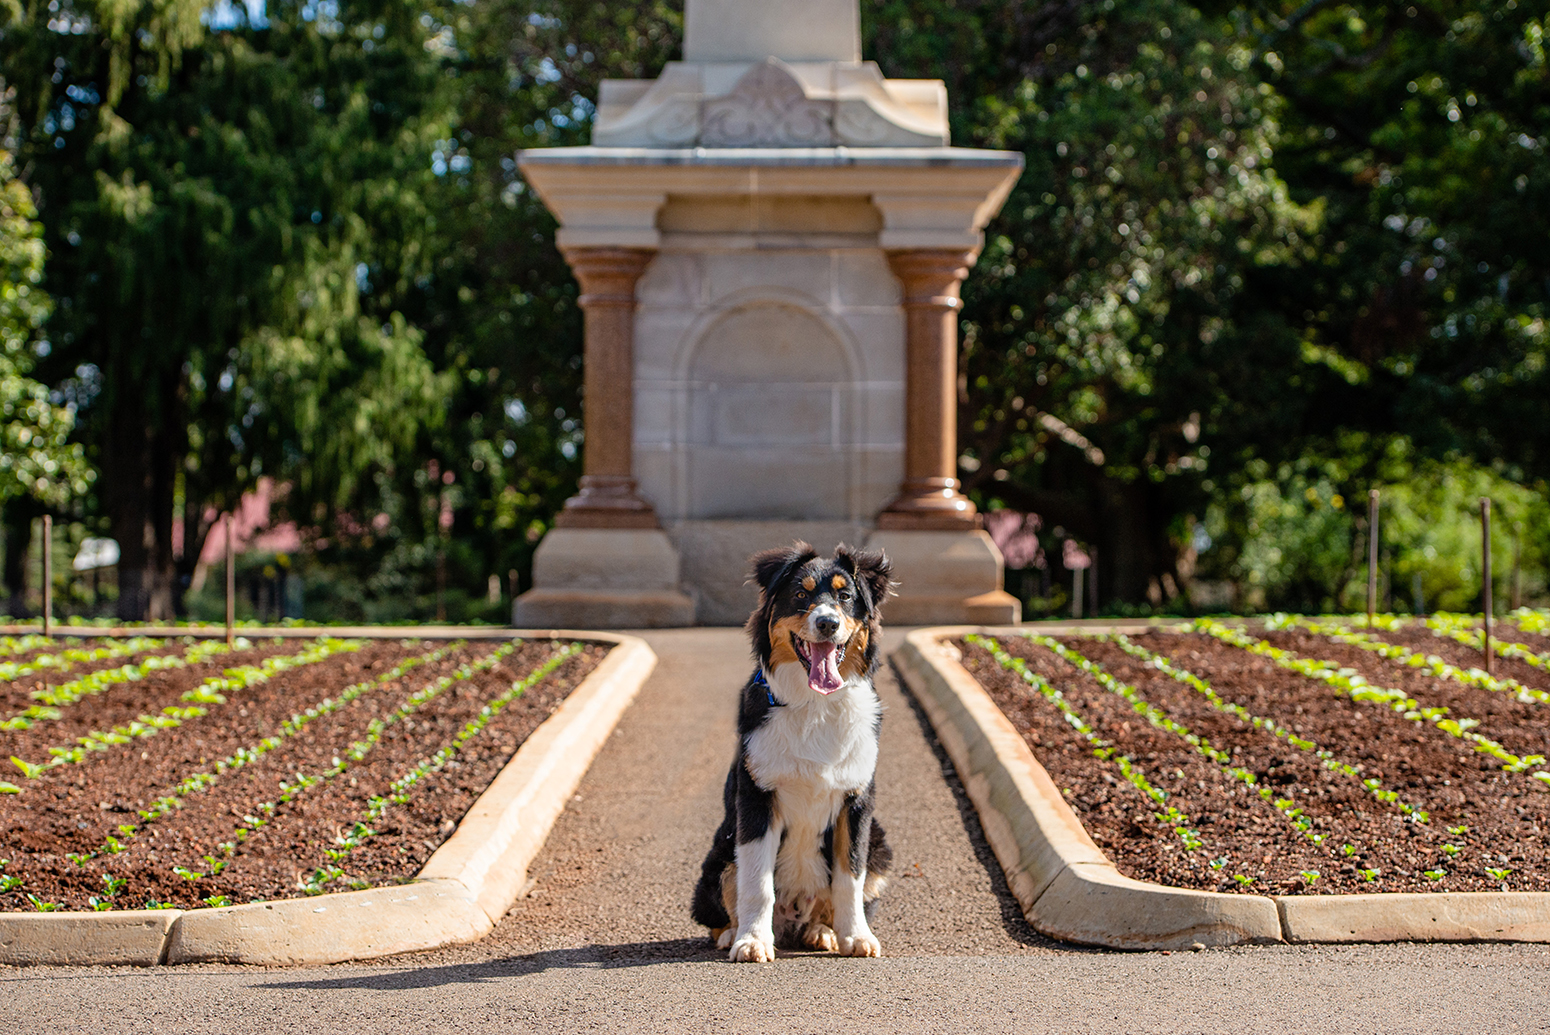 Petals And Pups 2020 September 18 To 27 Australian Dog Lover